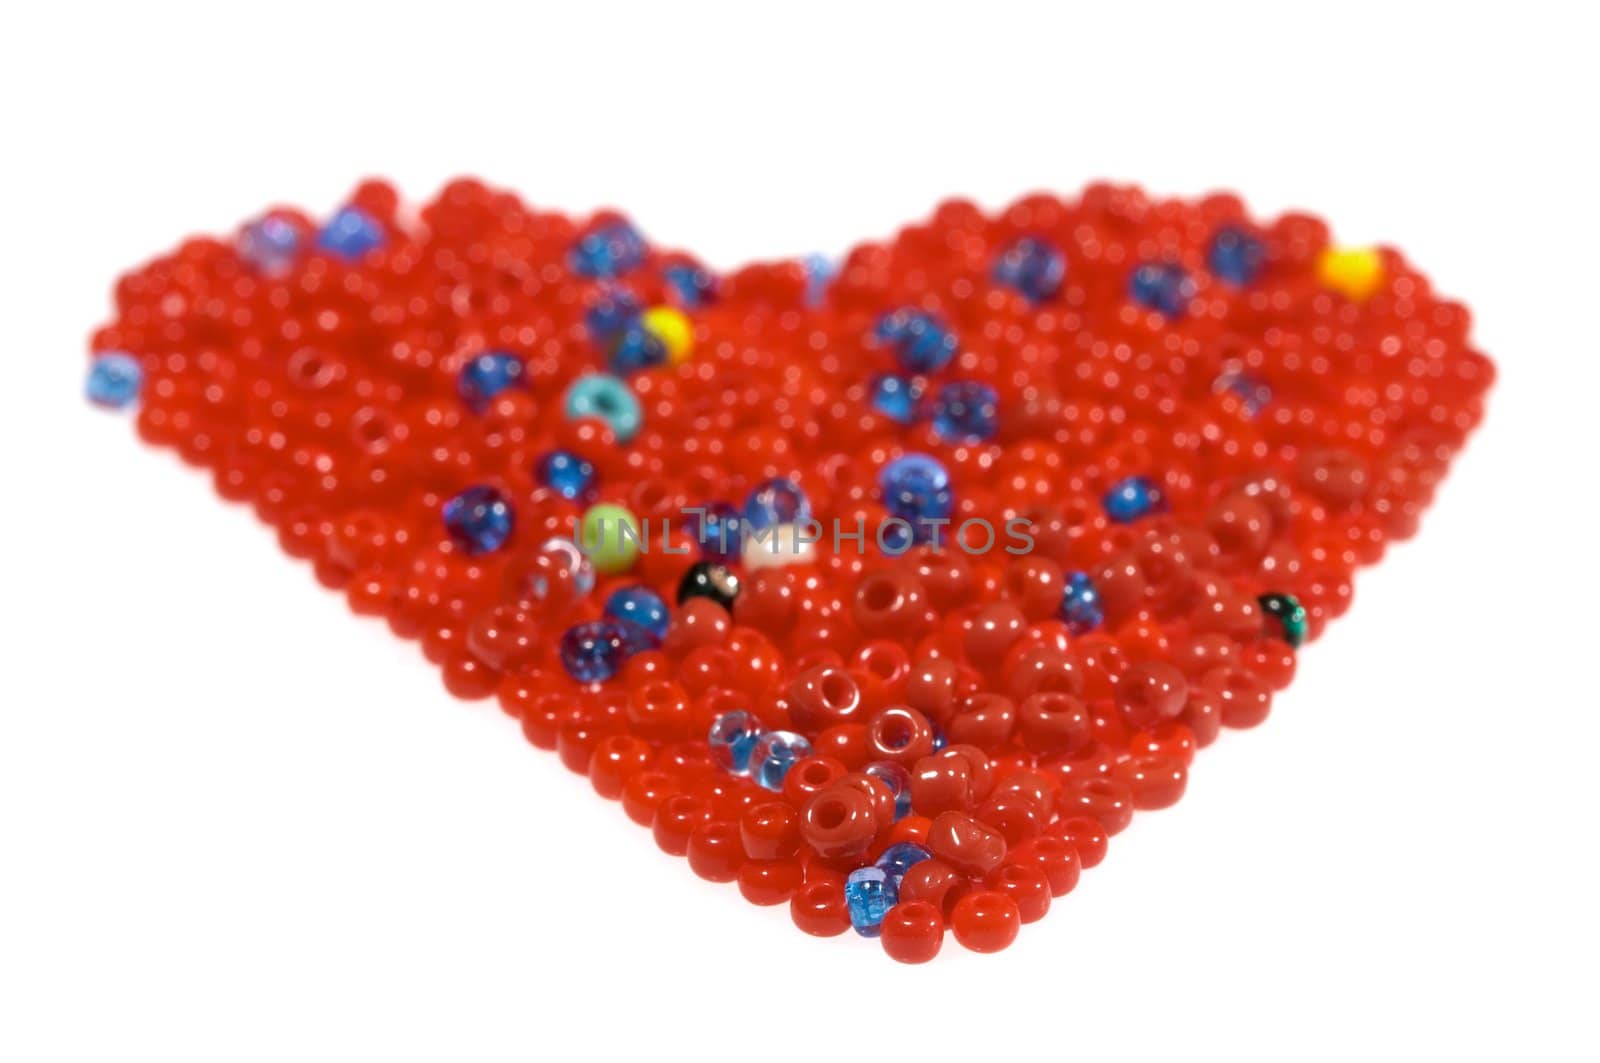 Heart made of glass beads, isolated on white